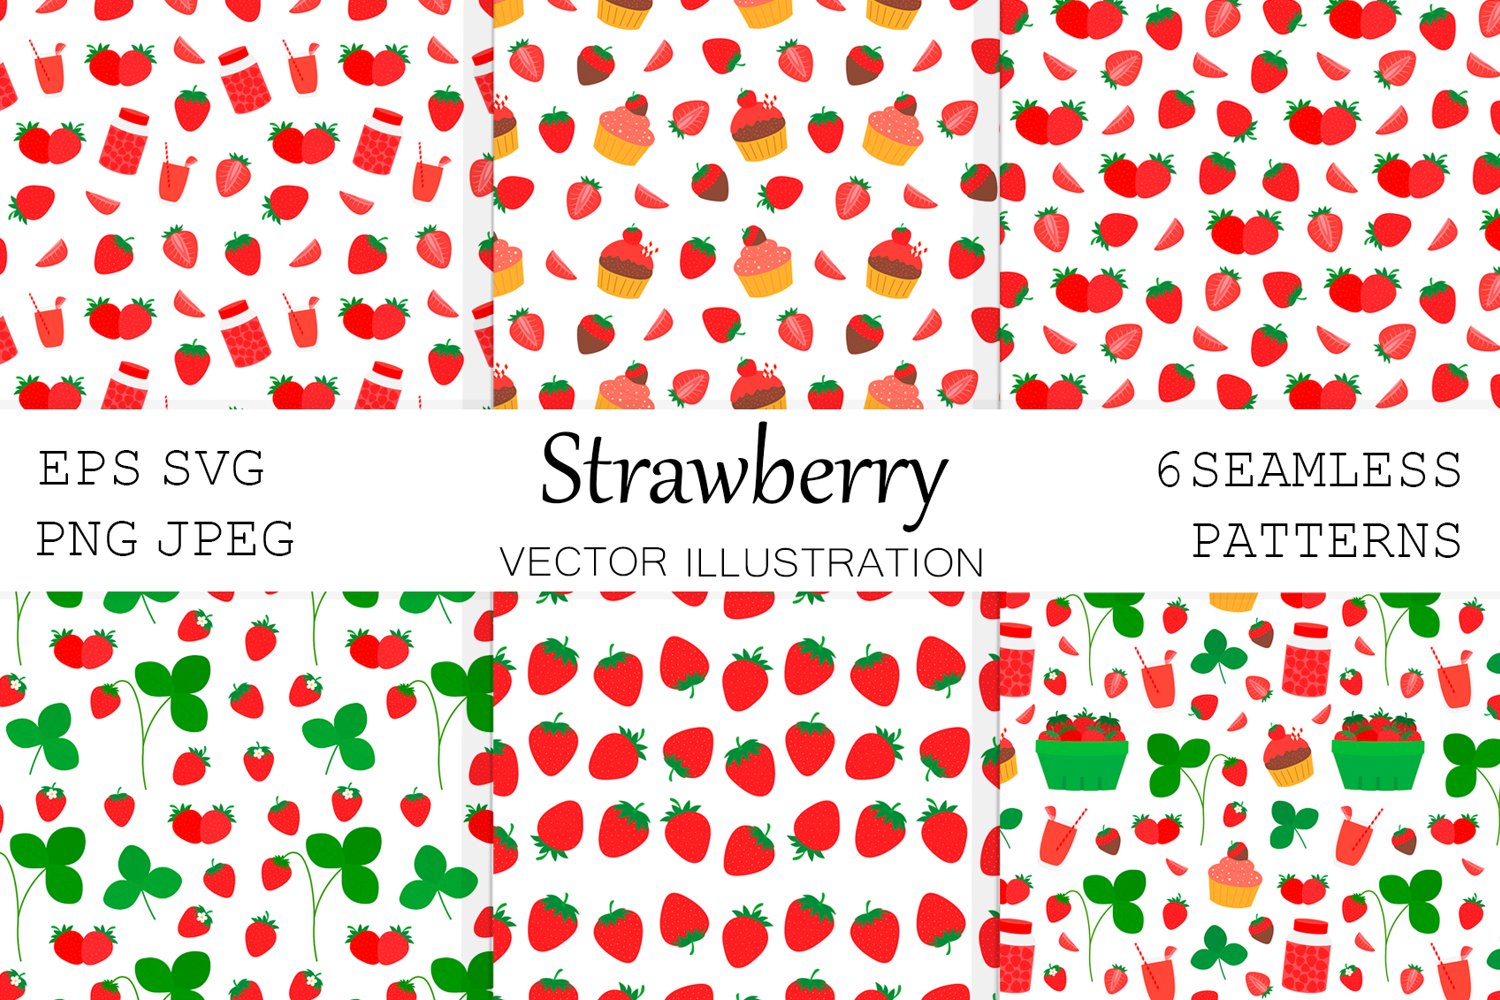 Cover image of Strawberry Seamless Pattern.